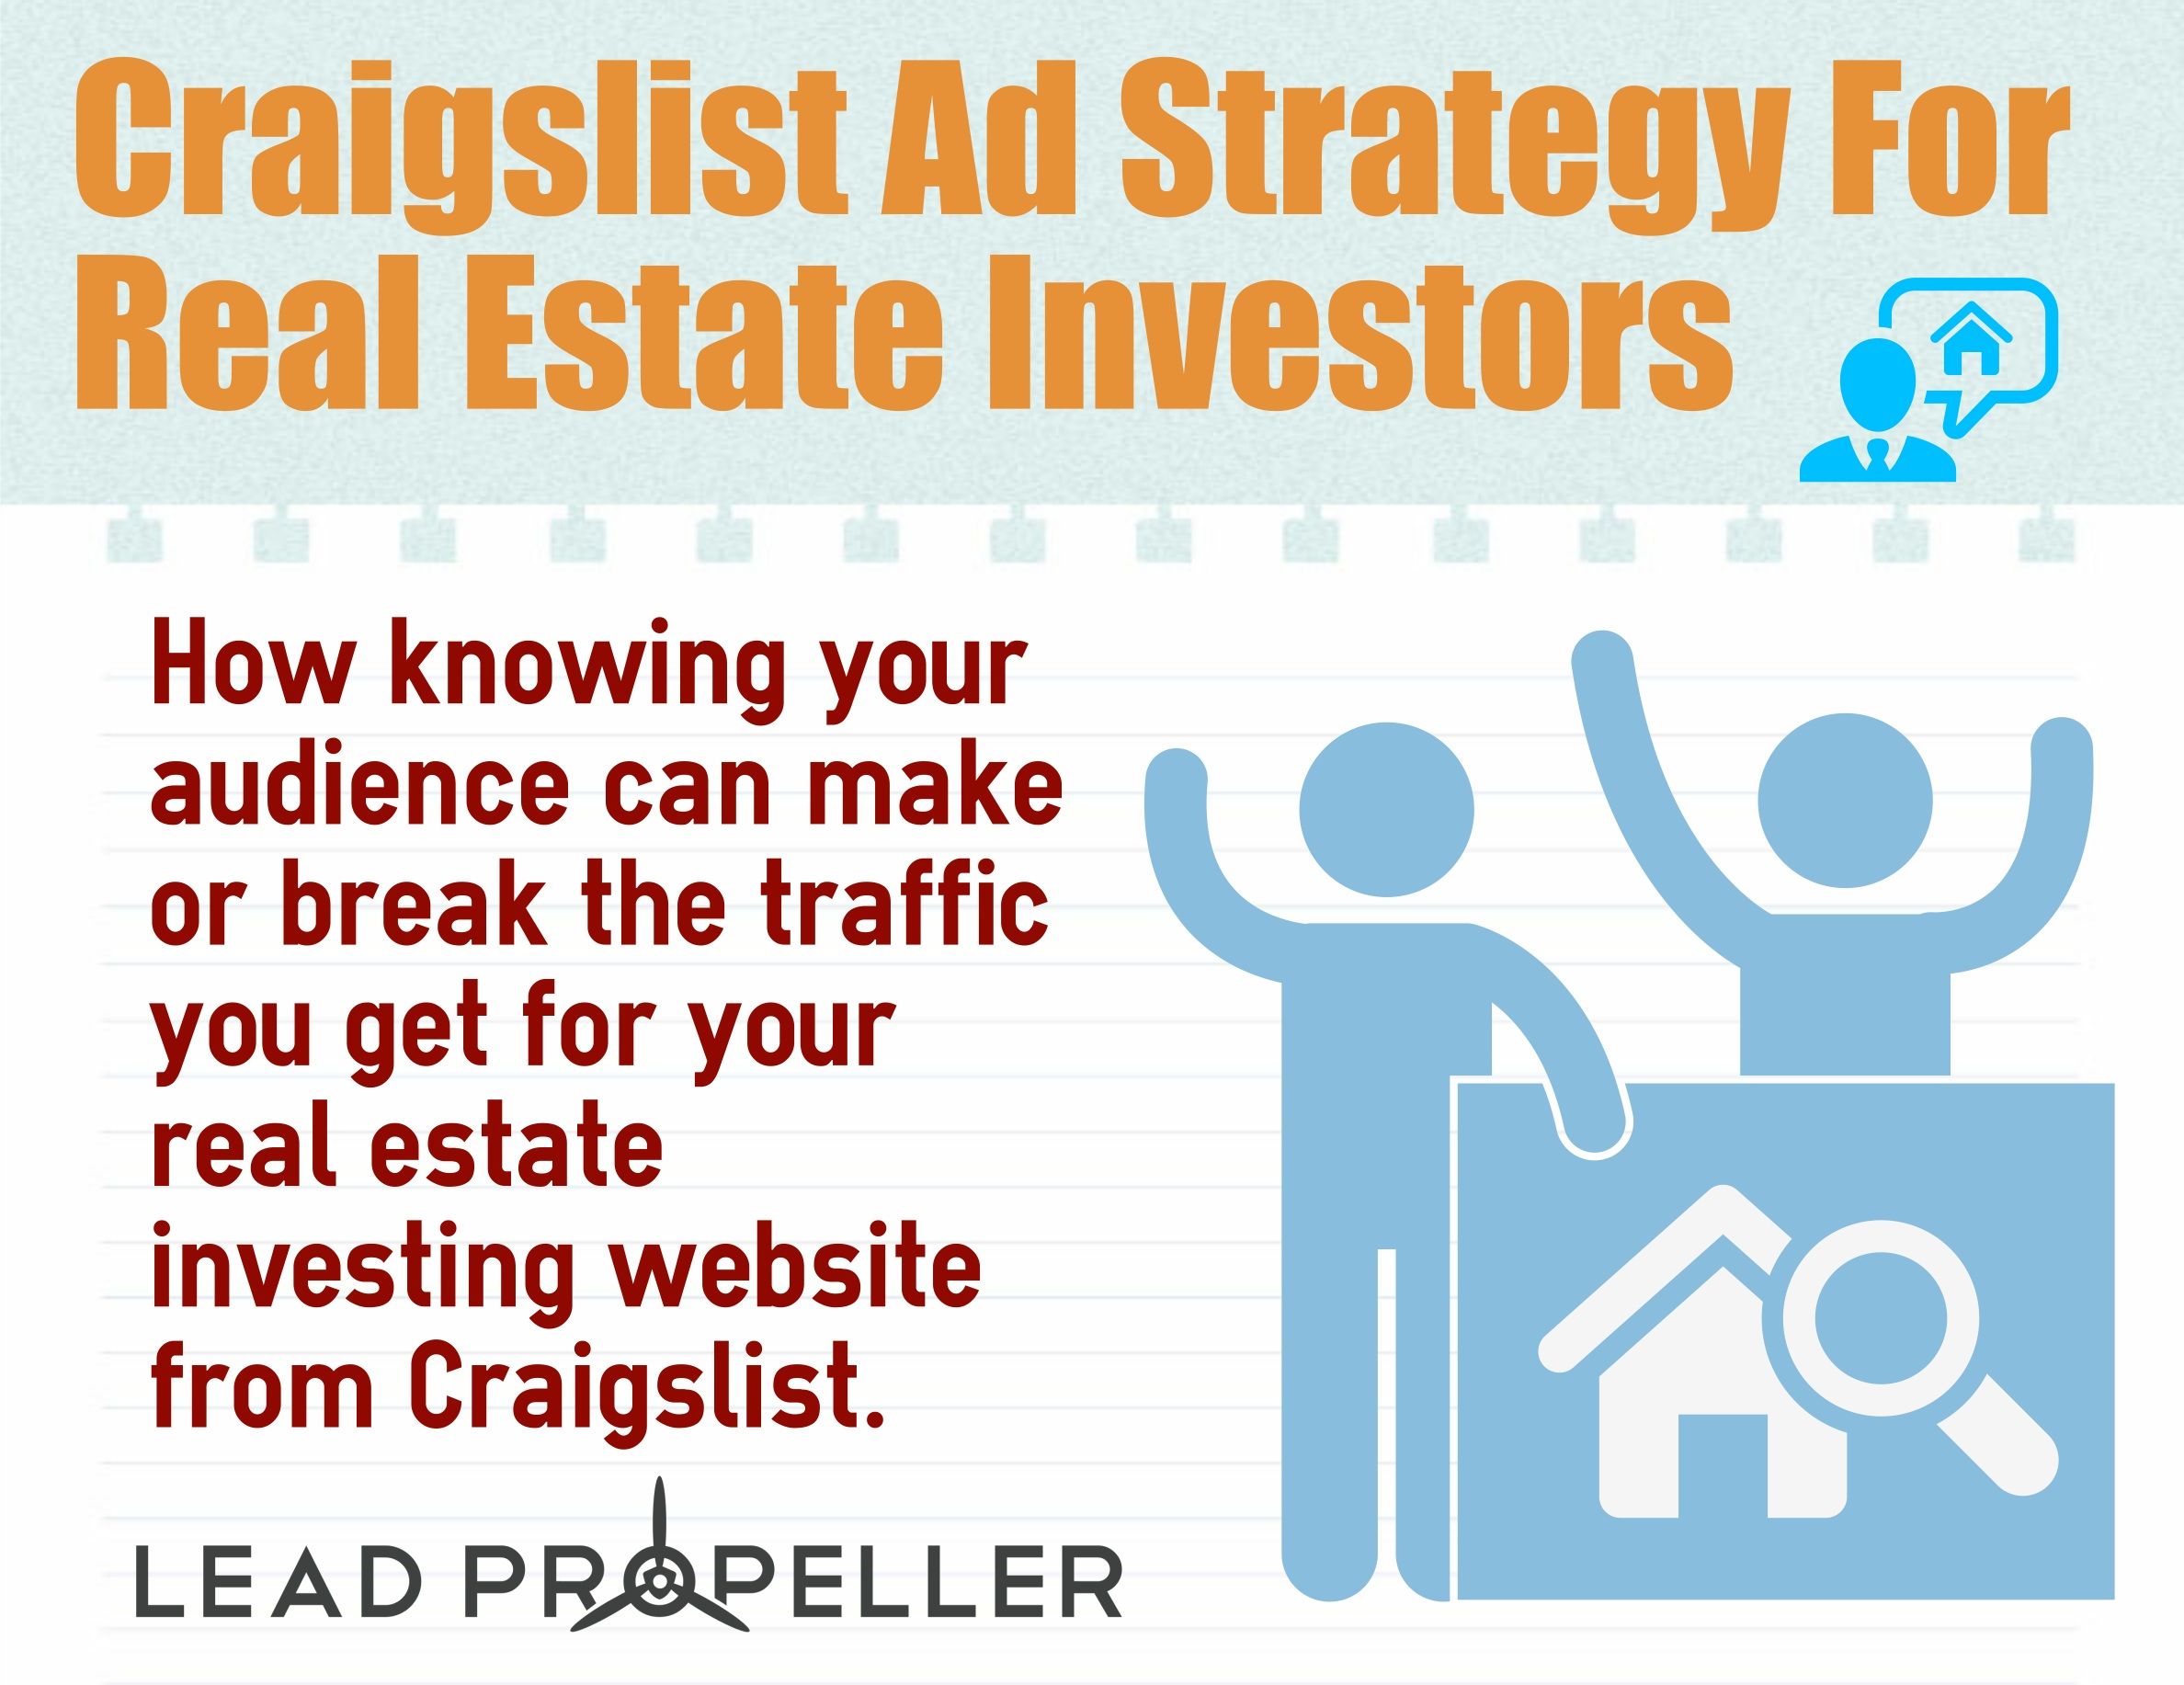 How to post real estate investor adds on craigslist